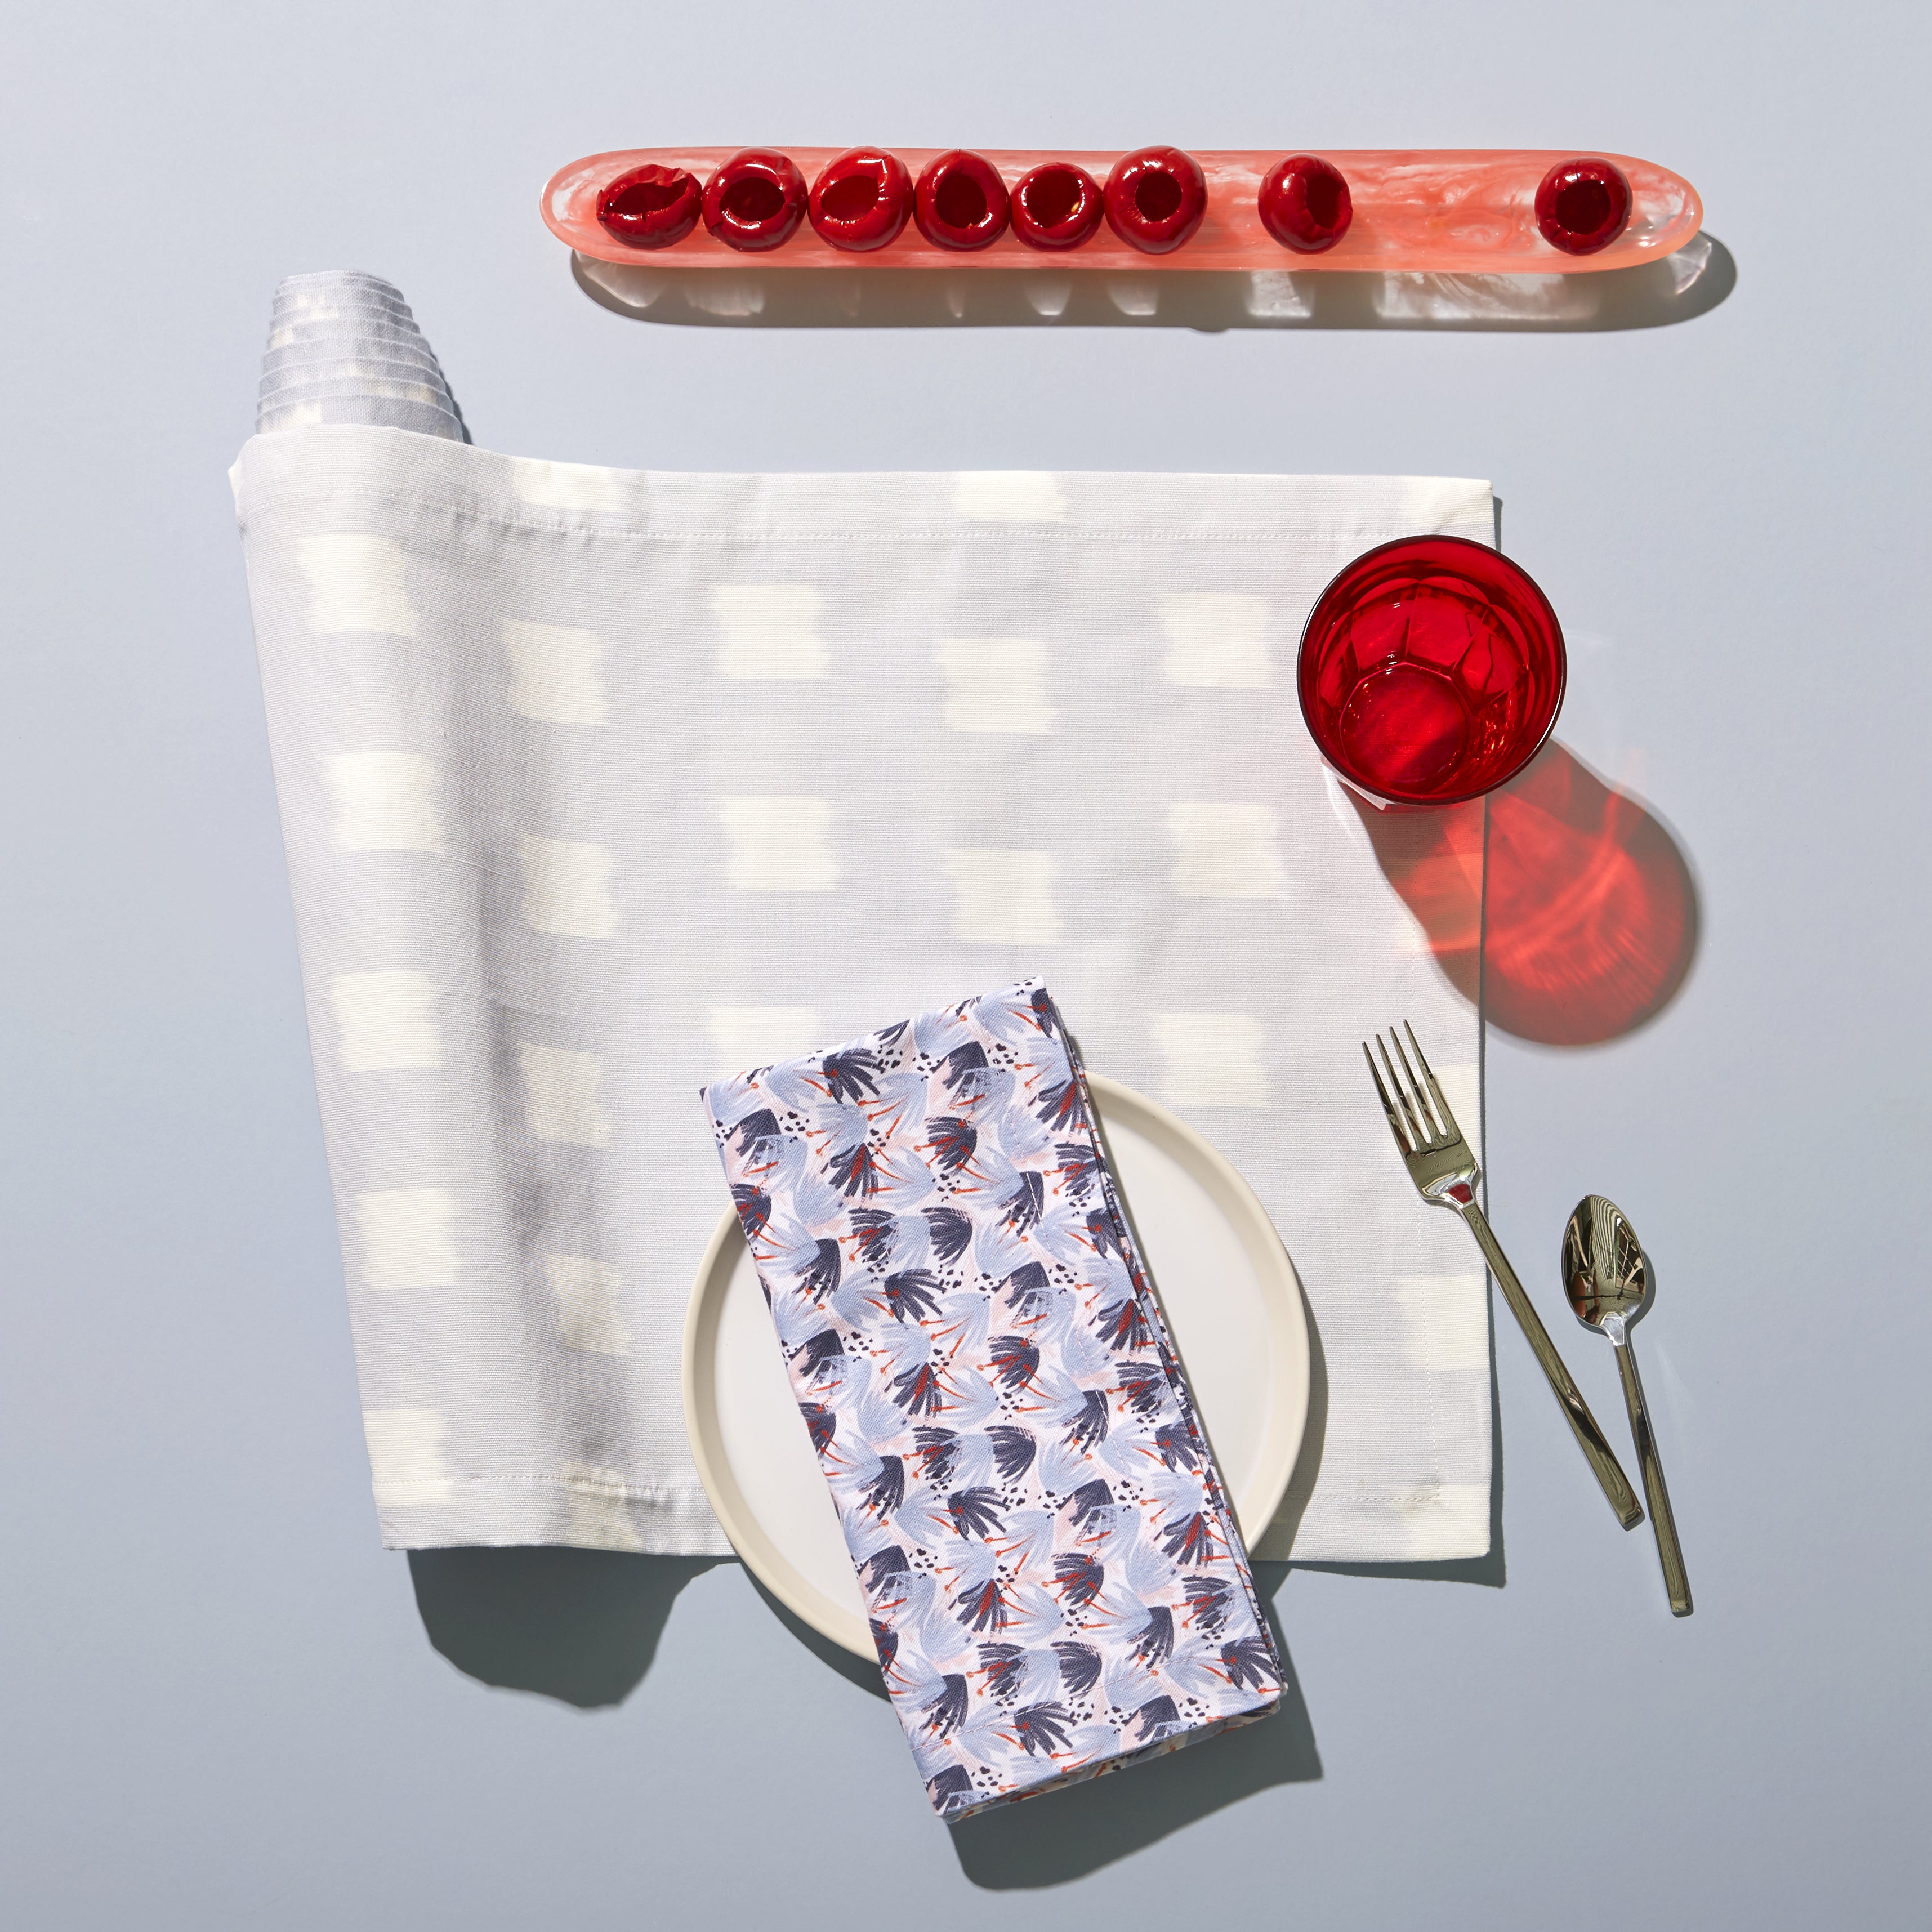 Red and Blue  Printed Napkin on top of white plate next to silverware and red glass over Sky Blue Pattern Printed Runner